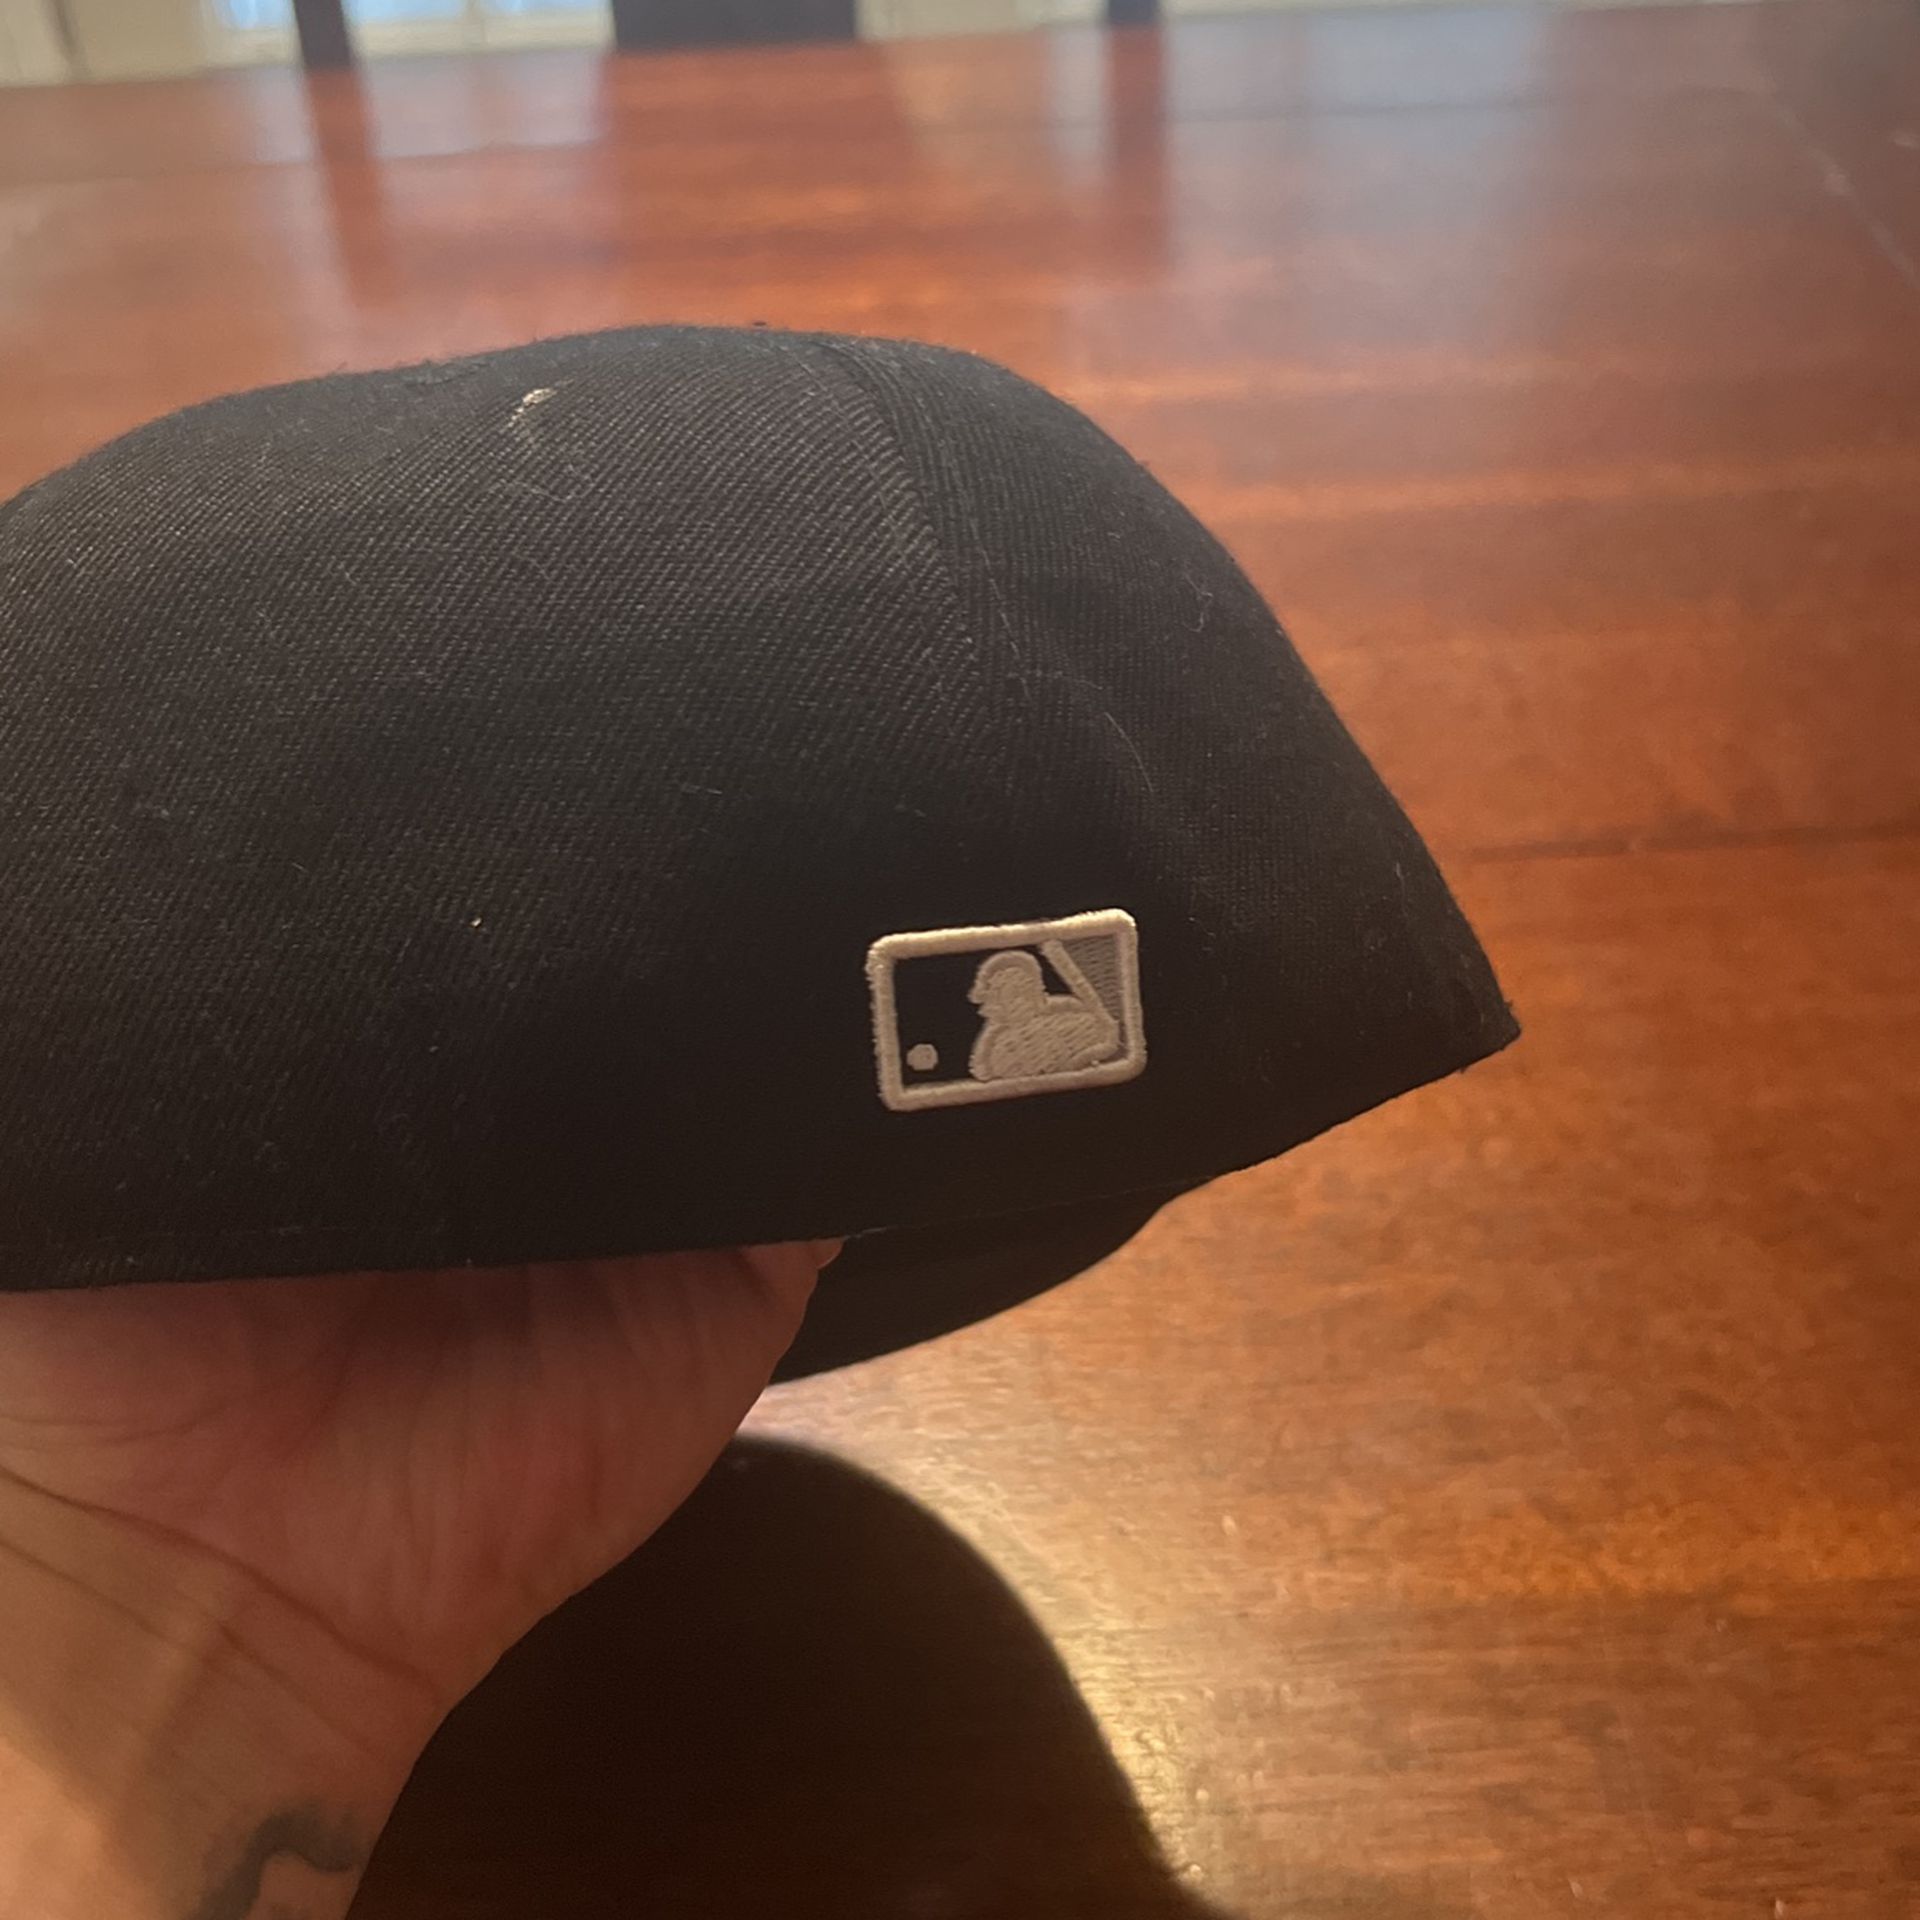 Cubs Big League Chew Fitted Hat for Sale in Stockton, CA - OfferUp